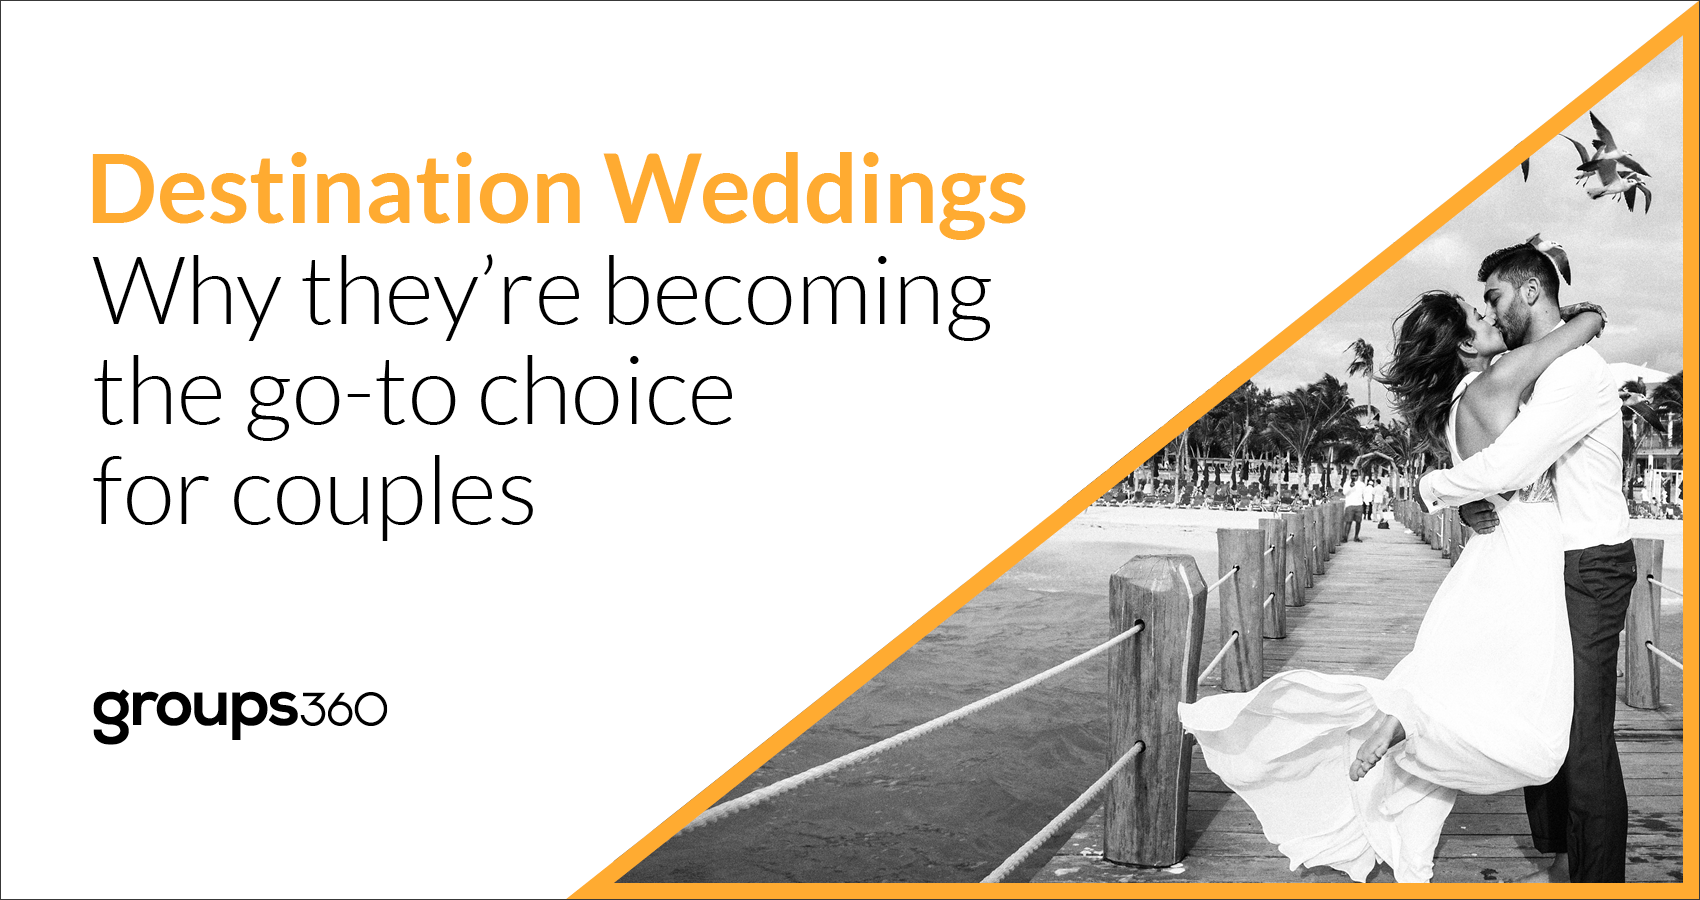 Destination weddings - Why they're becoming the go-to choice for couples